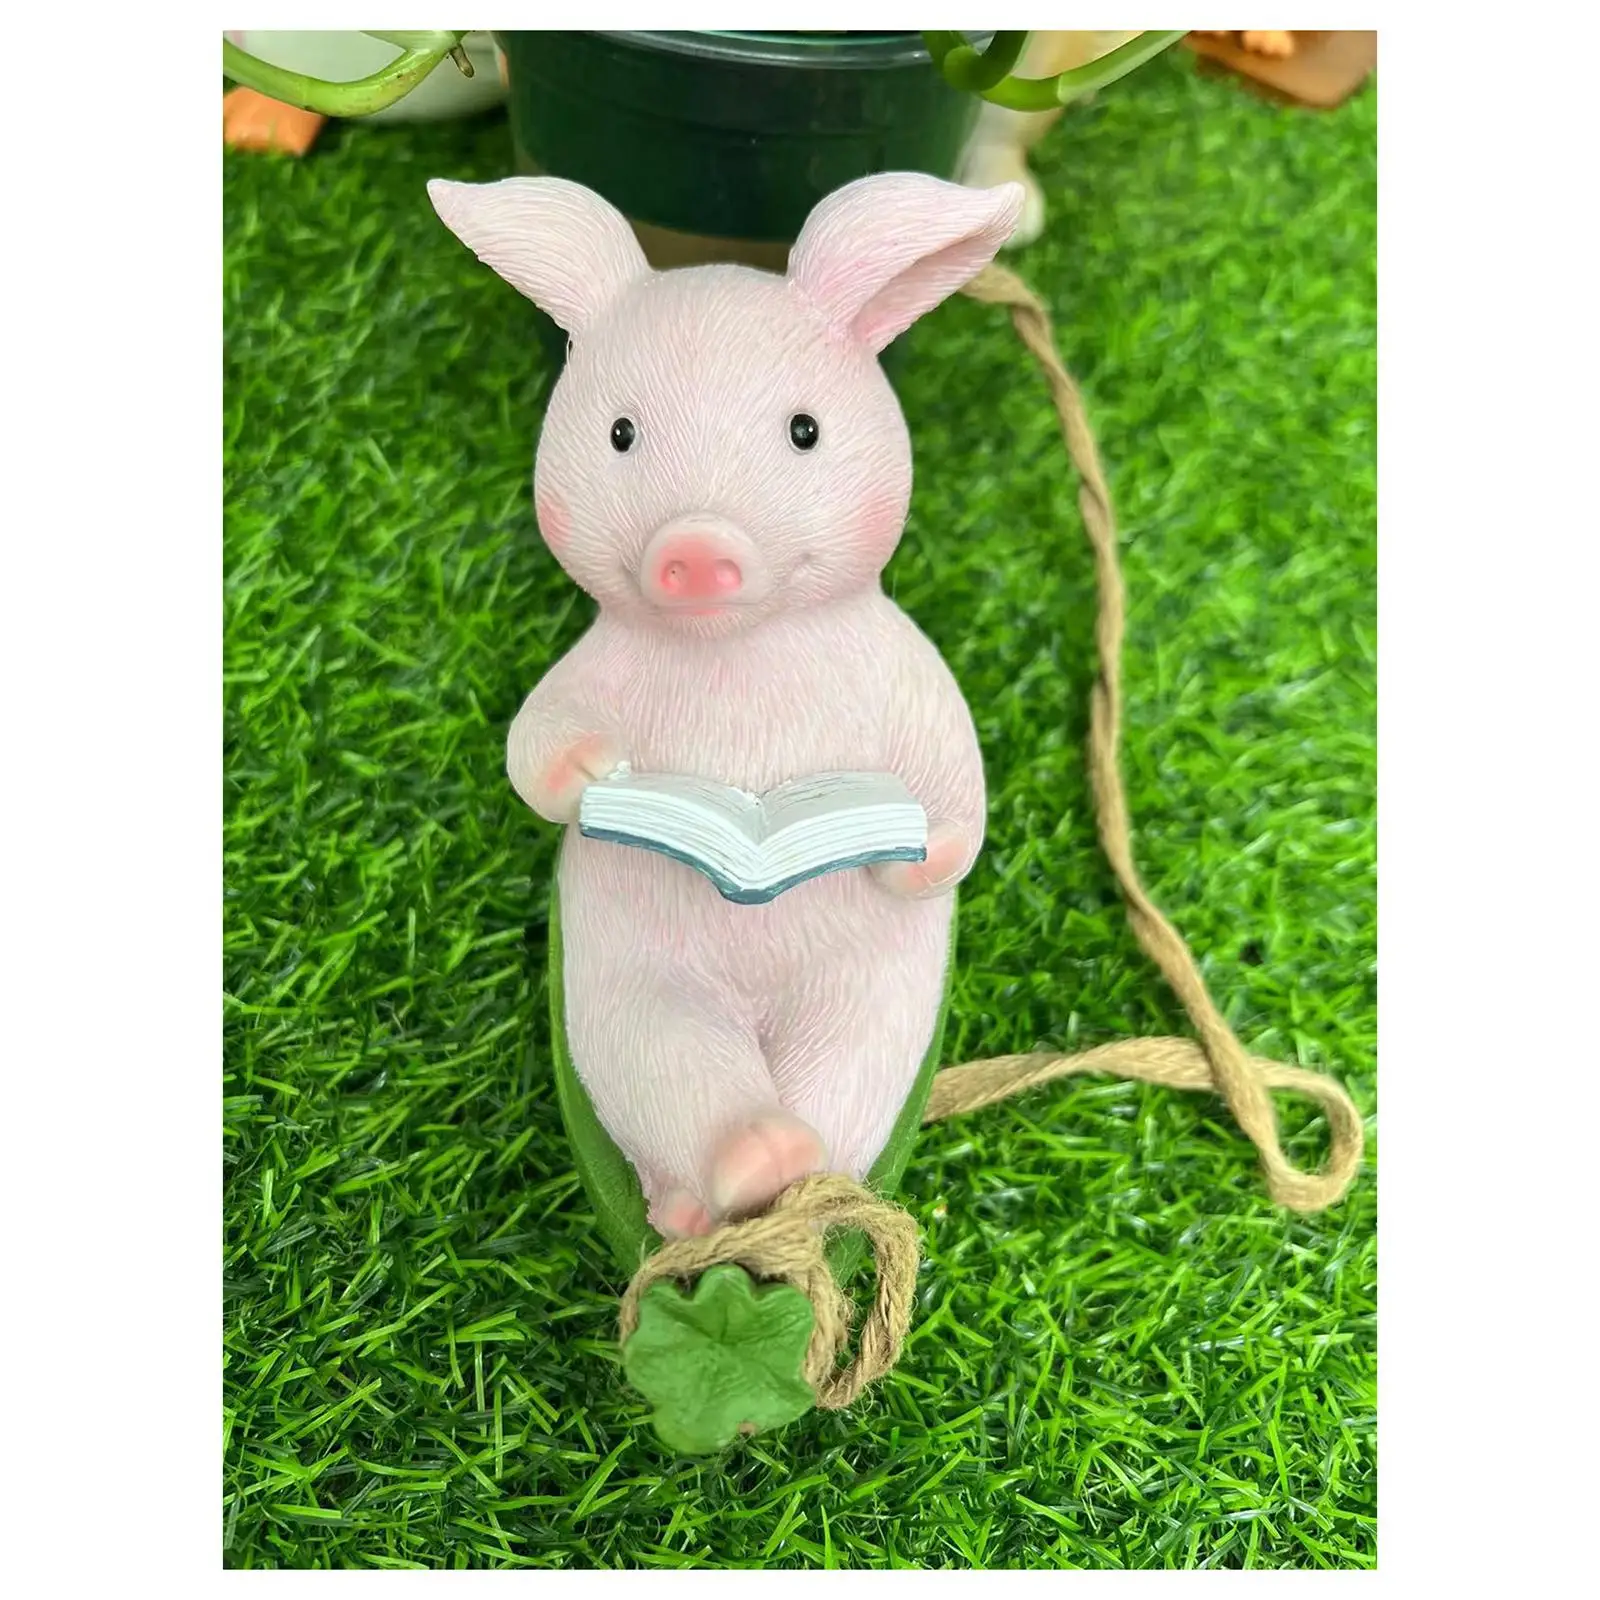 Simulation Pig Statues Pig Decor Outside Outdoor Garden Sculpture Lovely Animal Ornament for Backyard Patio Lawn Yard Decoration